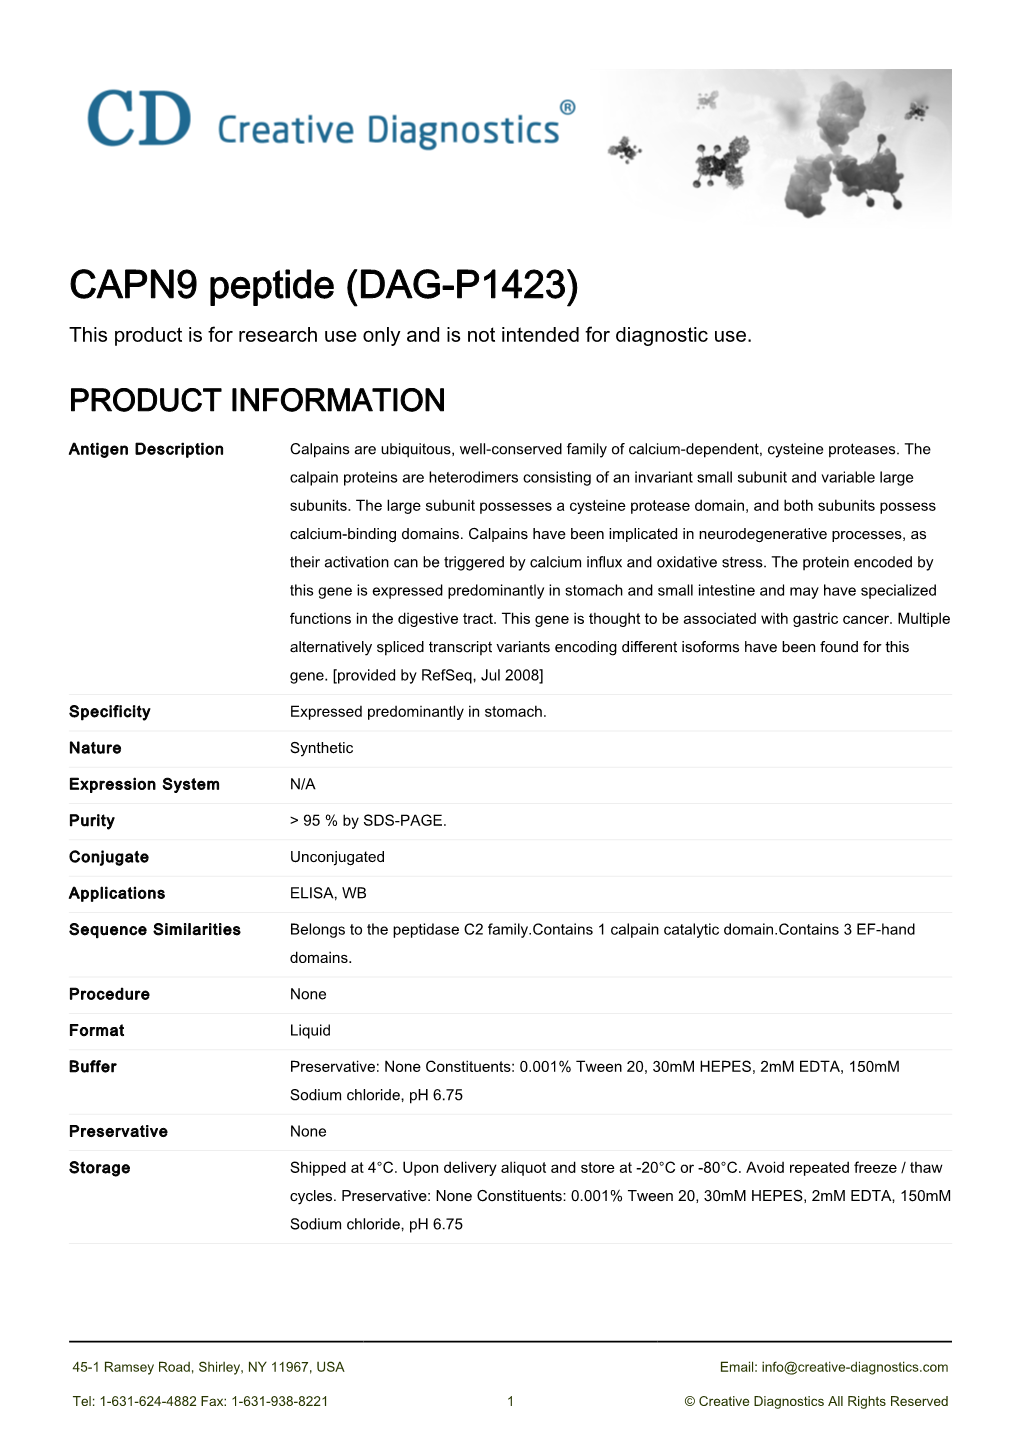 CAPN9 Peptide (DAG-P1423) This Product Is for Research Use Only and Is Not Intended for Diagnostic Use